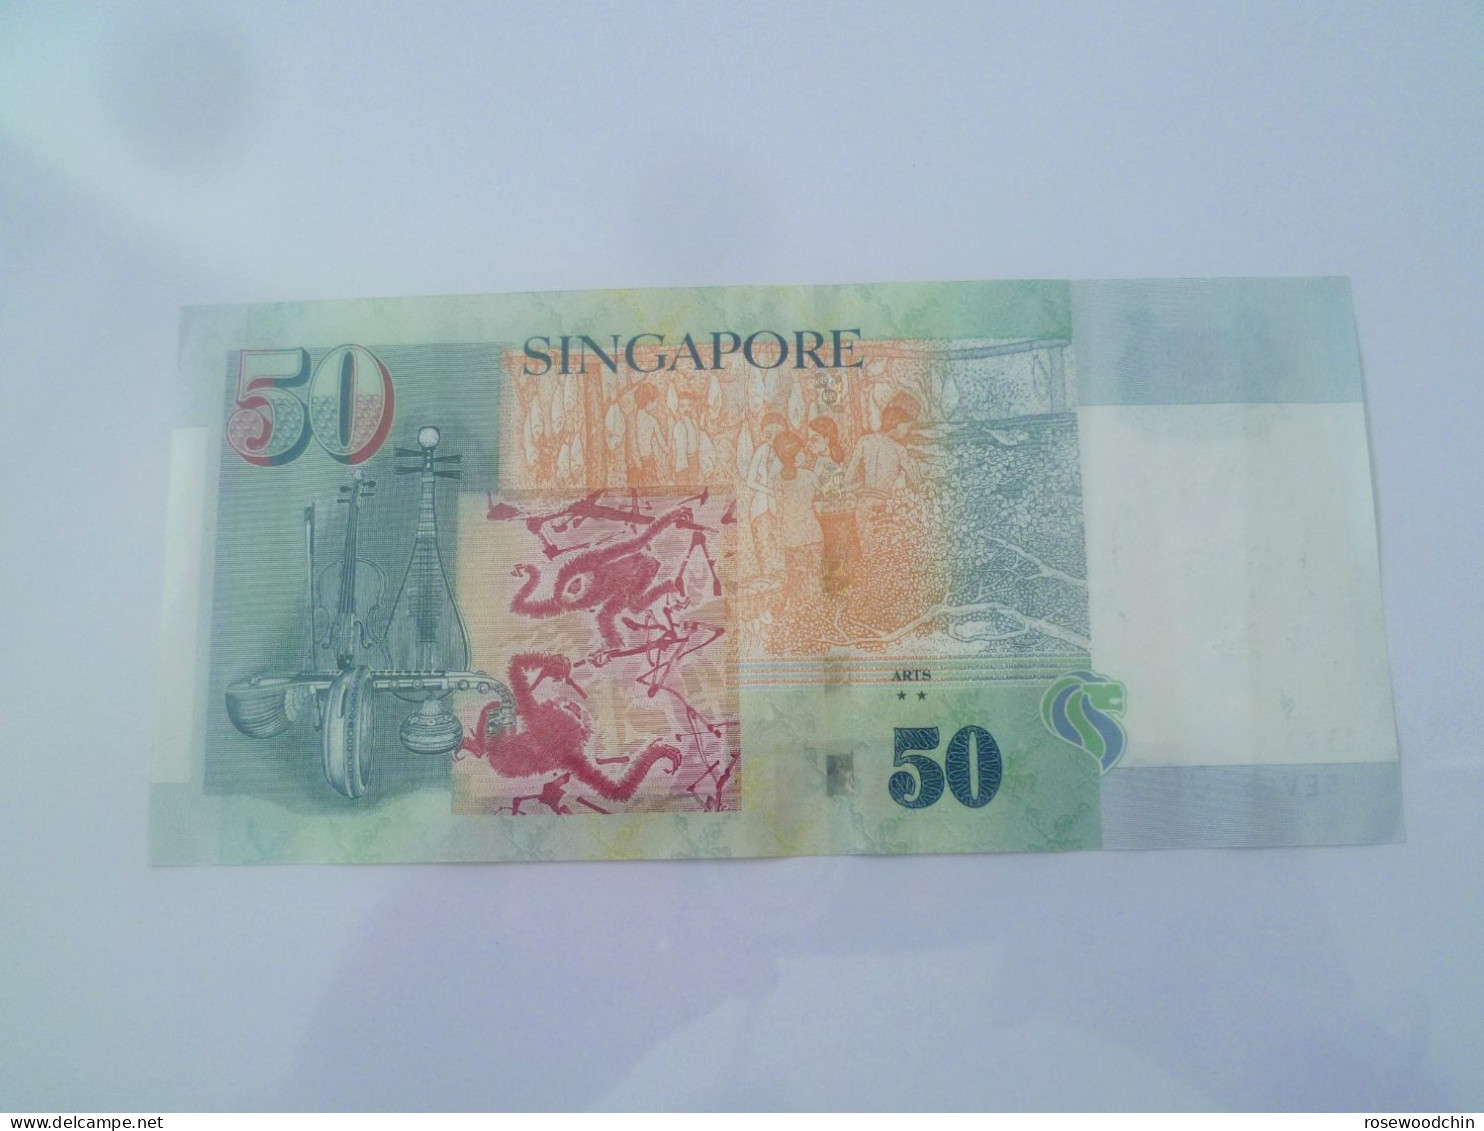 Banknote - Singapore $50 Dollars Portrait Series Repeater Nice Lucky Number Ref : 5EV431000 (#222) - Singapour